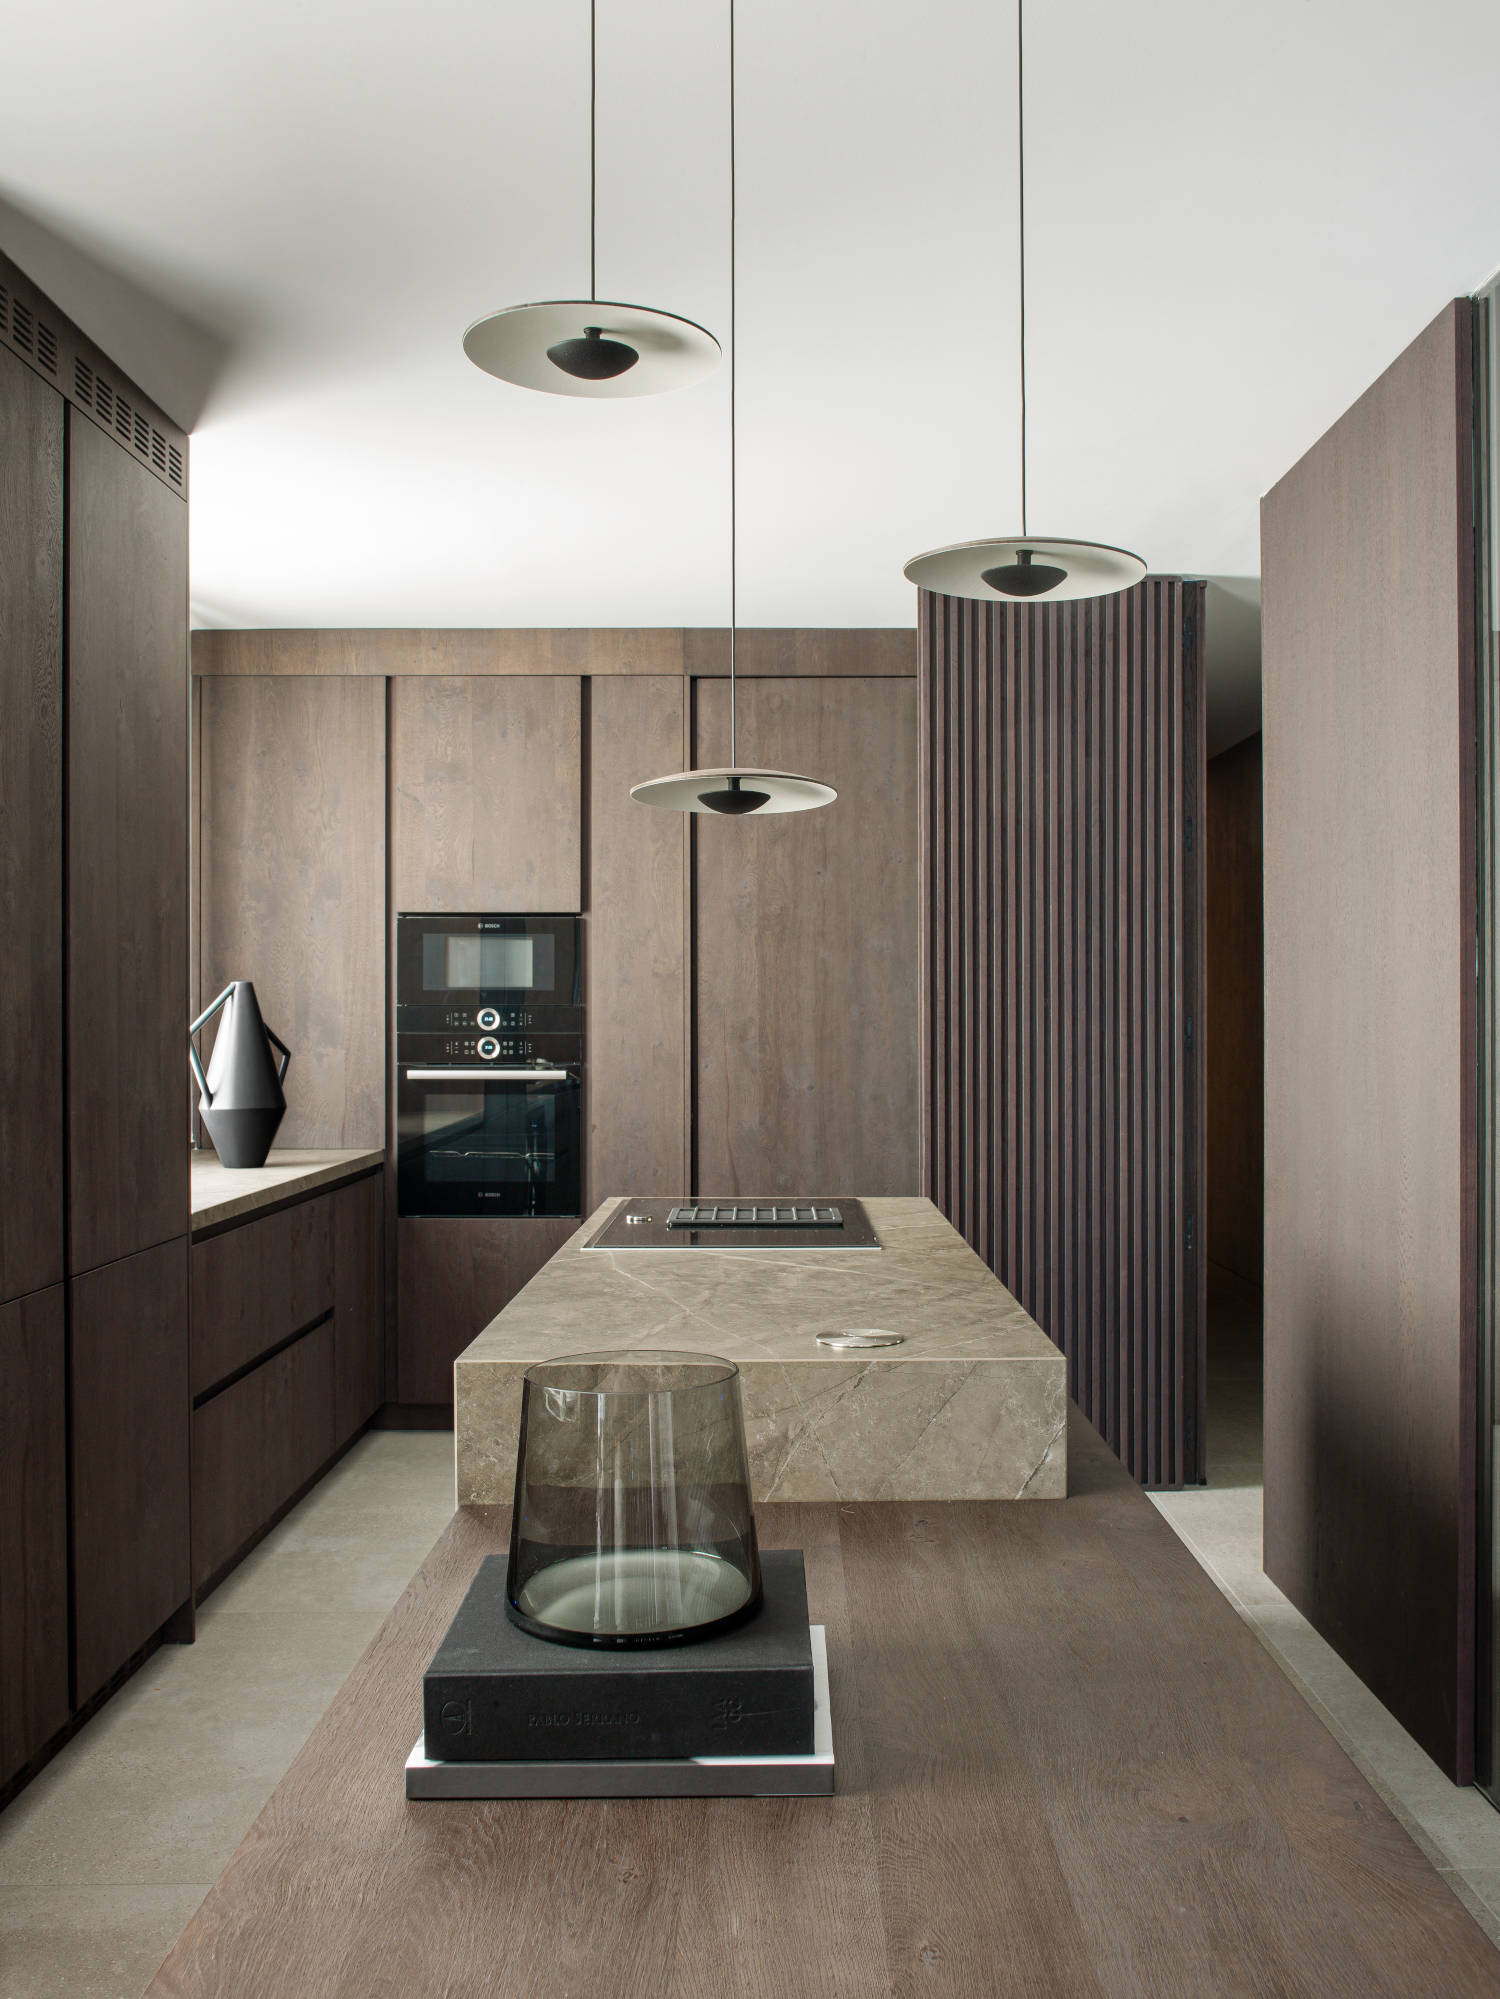 Image of Vivienda Fuencarral Villalon Studio11 in Dekton Kira is the star of the kitchen in this Madrid flat that redefines the concept of luxury - Cosentino